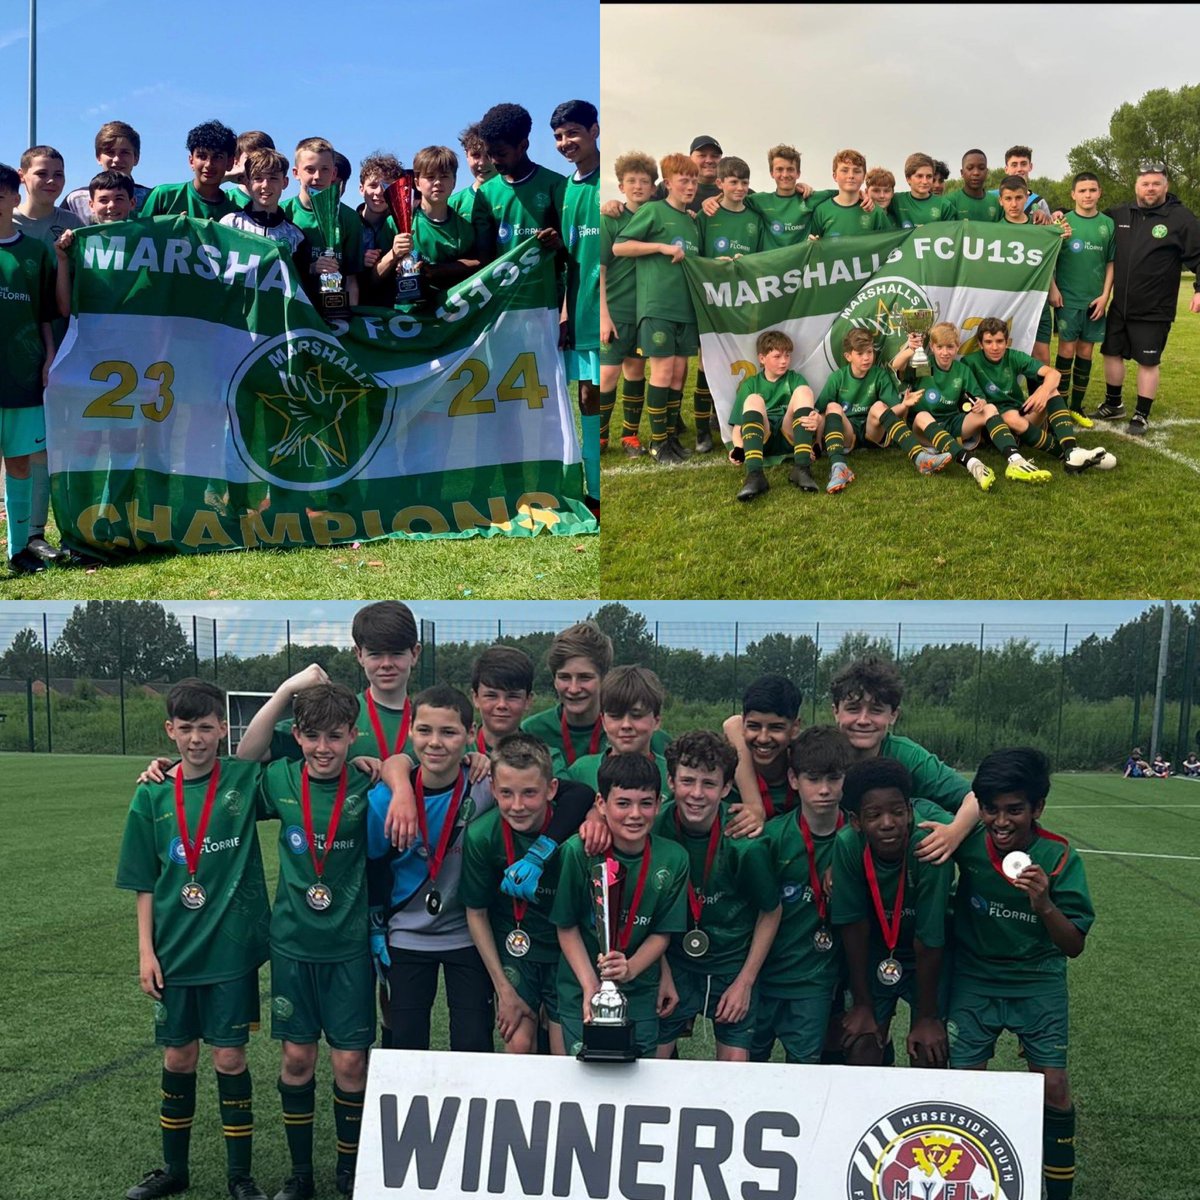 Marshalls 13s . Merseyside Y League 🏆 Liv County Prem D2 🏆 Merseyside & H League 🏆 Merseyside & H Cup 🏆 Super proud of coaches, players & parents. Thanks to league organisers @_MYFL @LCPL2012 @Liverpool_CFA M&H League. giving up their time so the boys can play.